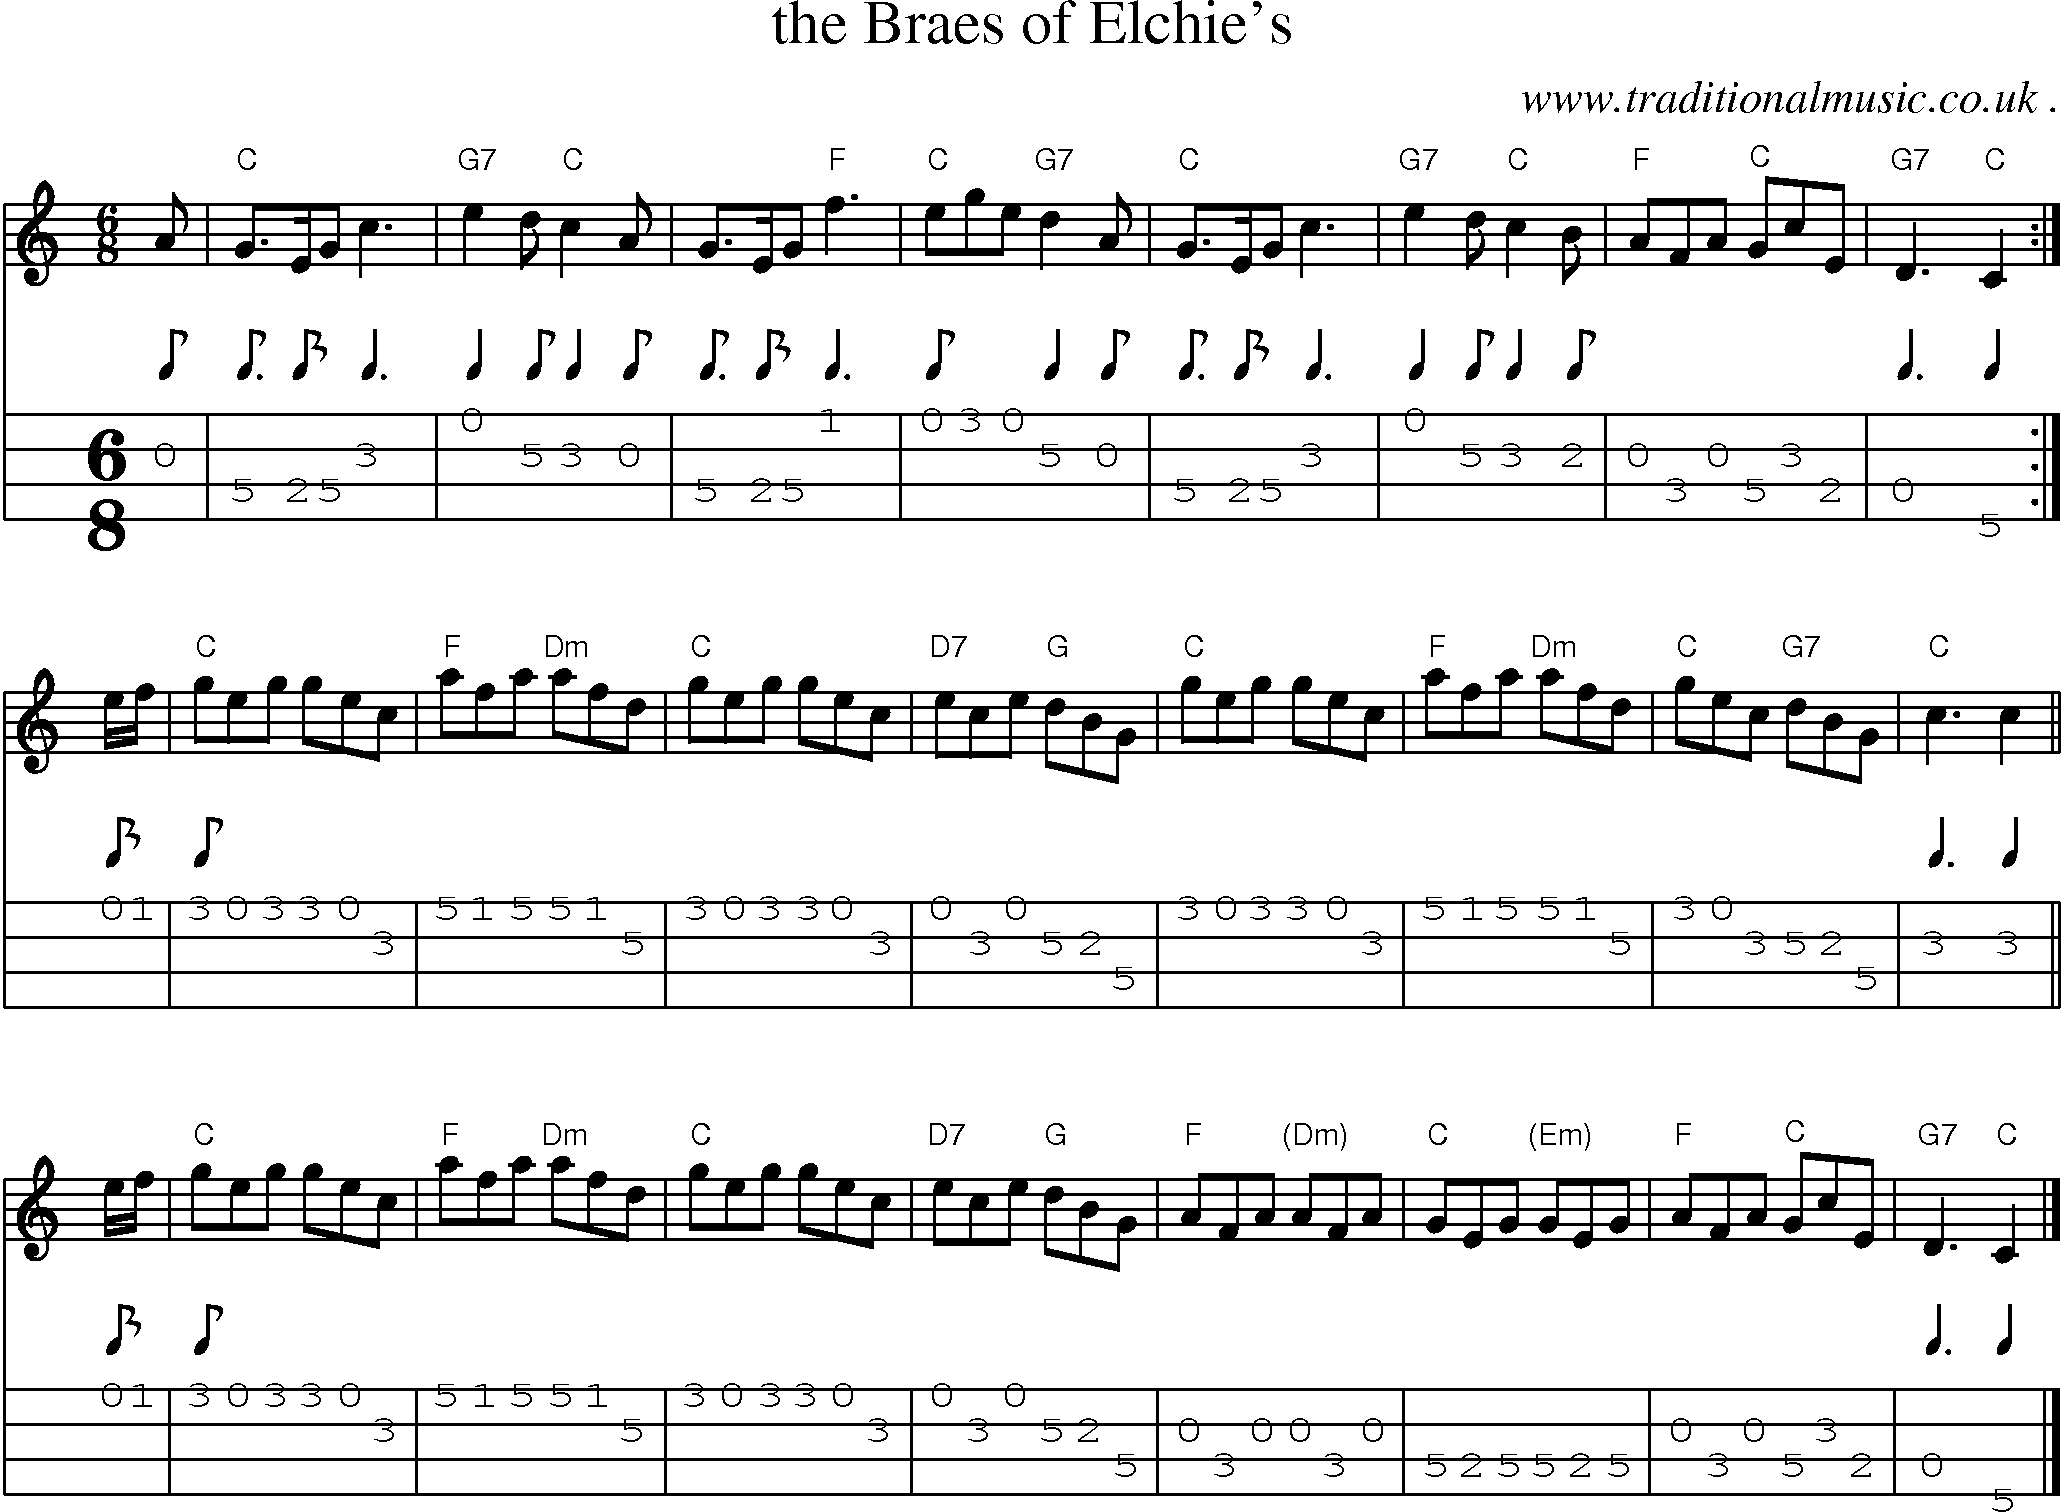 Sheet-music  score, Chords and Mandolin Tabs for The Braes Of Elchies